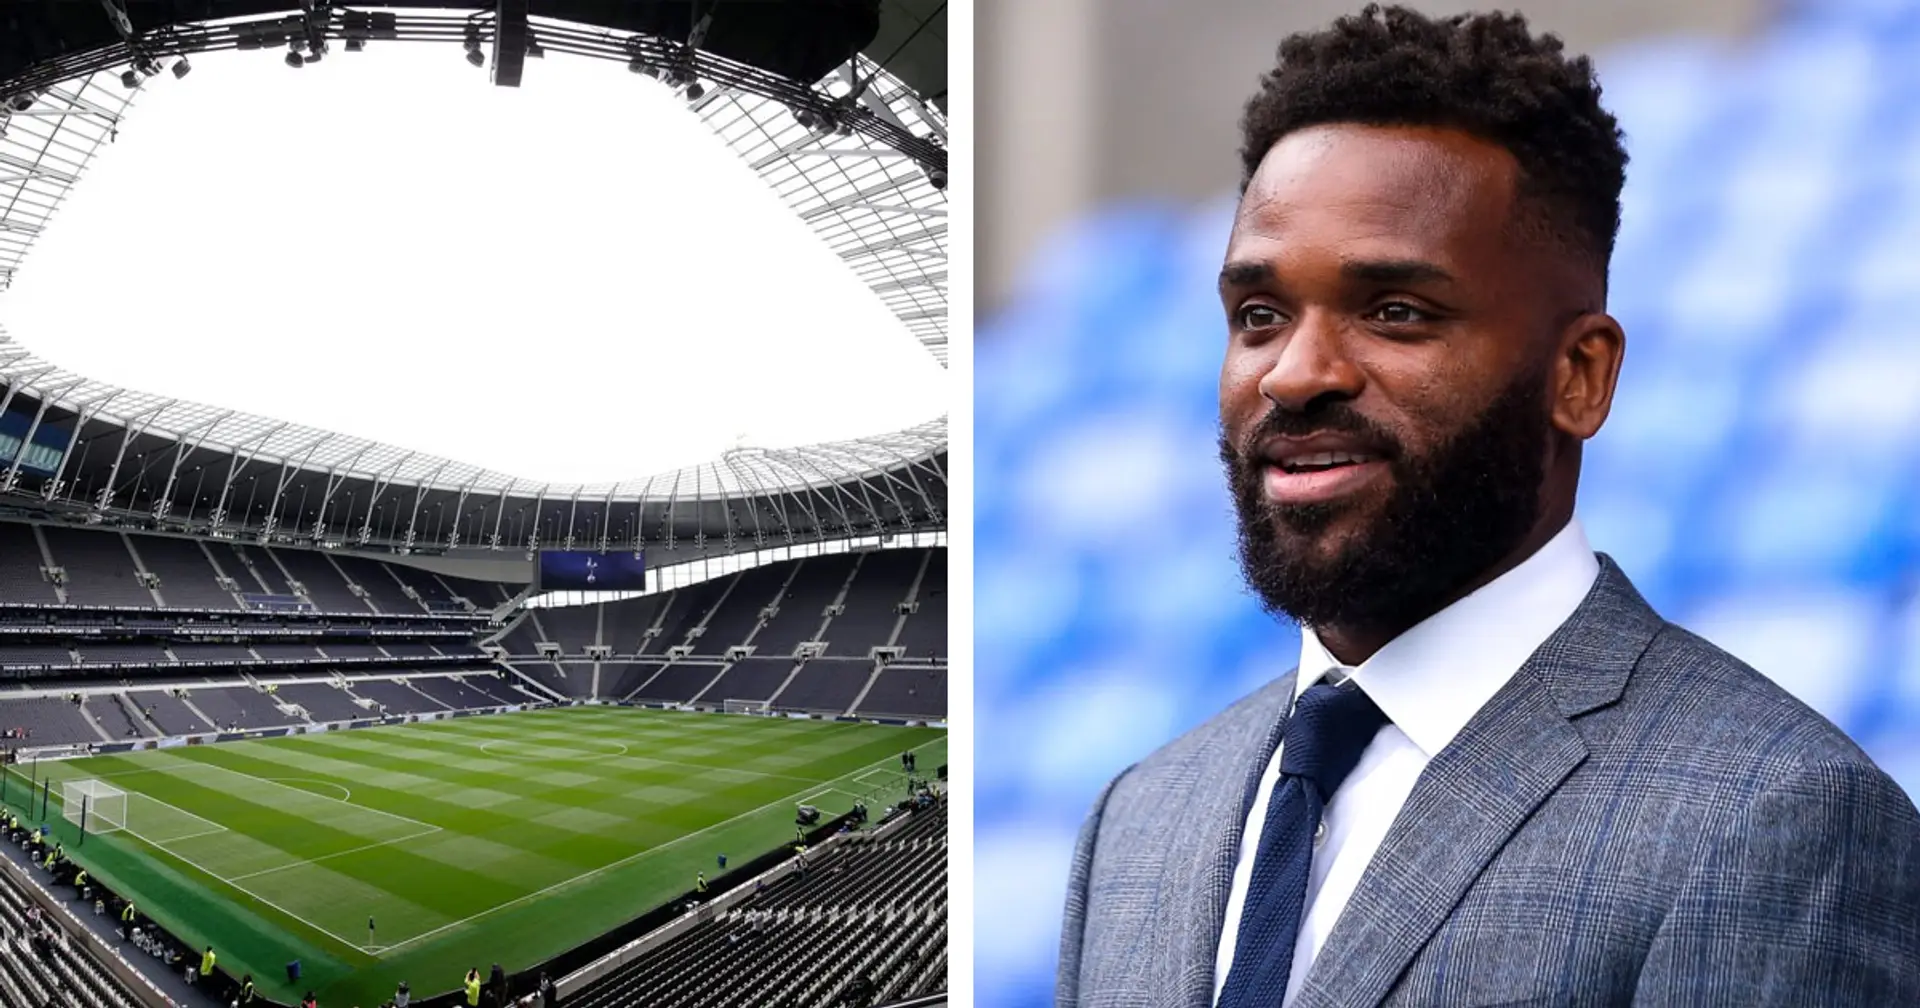 ‘Spurs fans are always vocal, always get behind their team’: Darren Bent believes lack of supporters can hurt Tottenham against United